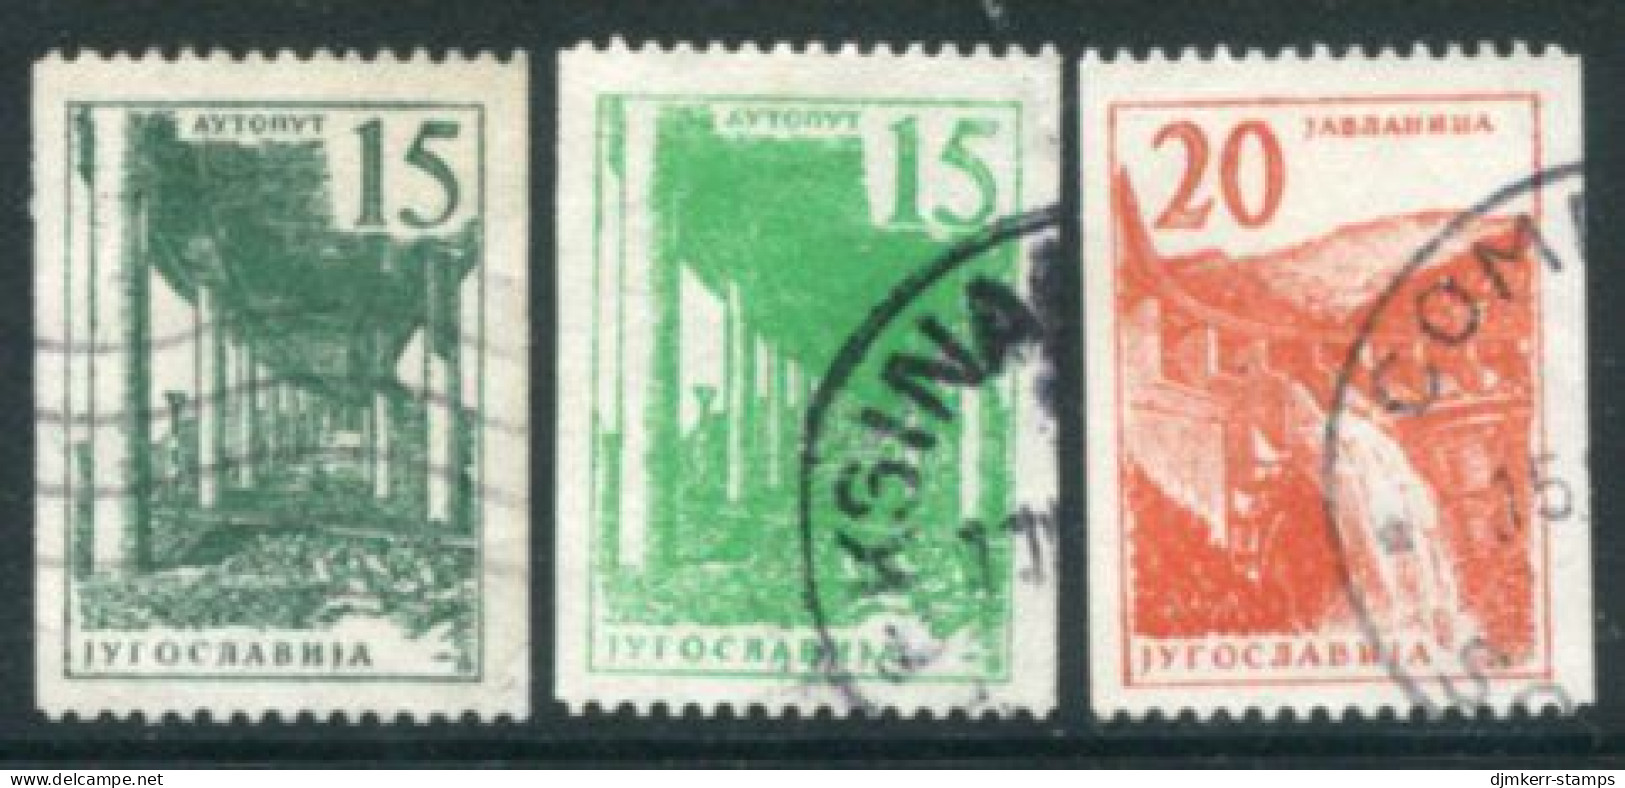 YUGOSLAVIA 1959 Definitive Coil Stamps  Used.  Michel 898a,b-899 - Gebraucht